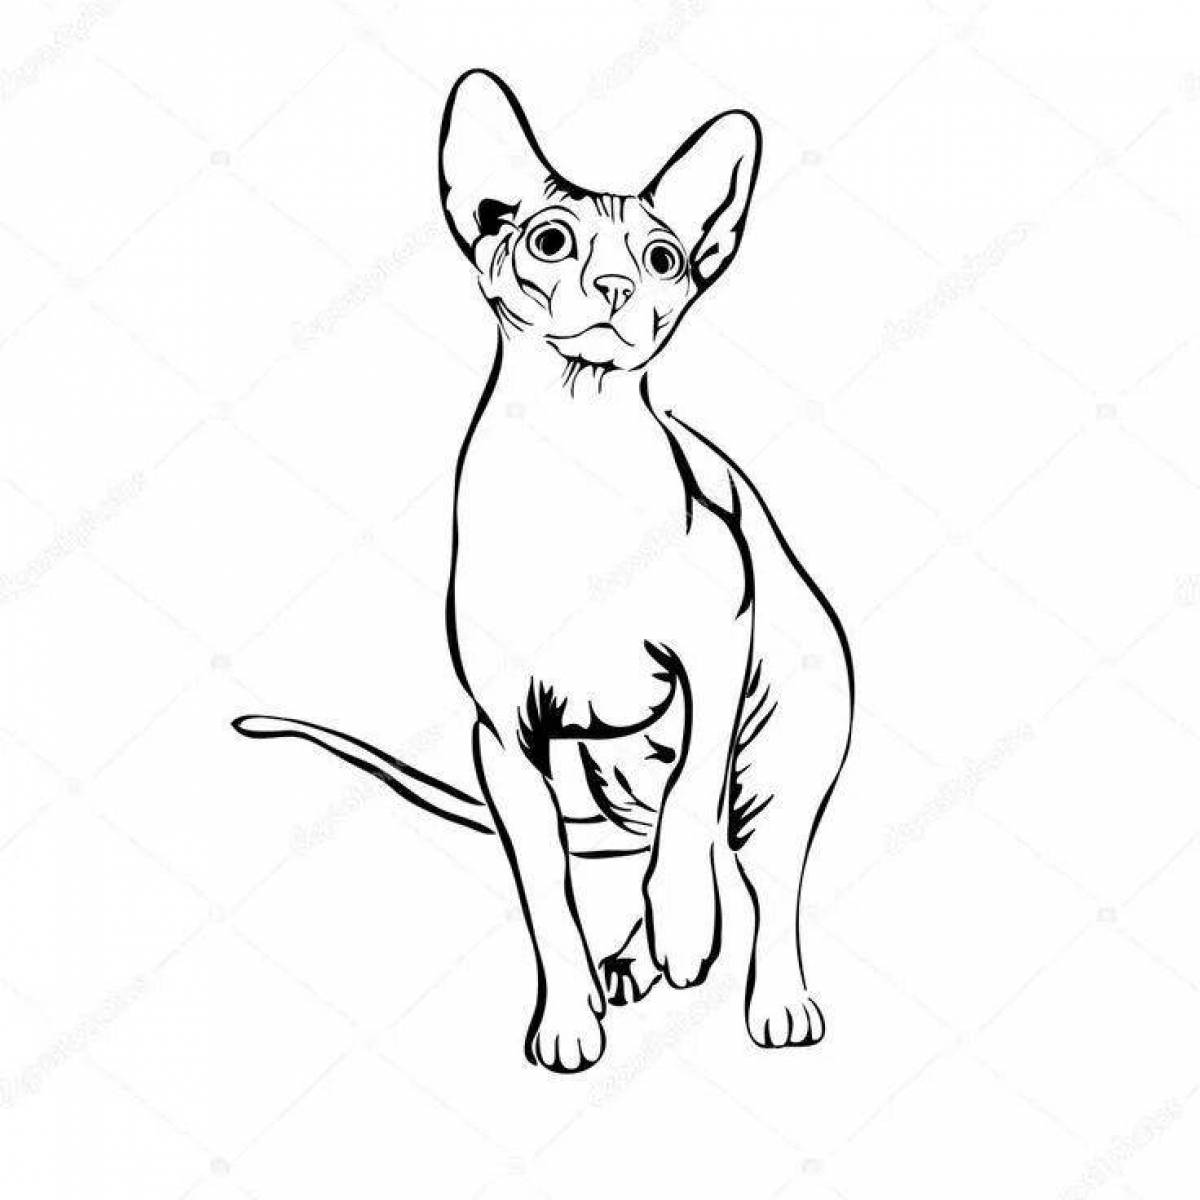 Funny sphinx cat coloring book